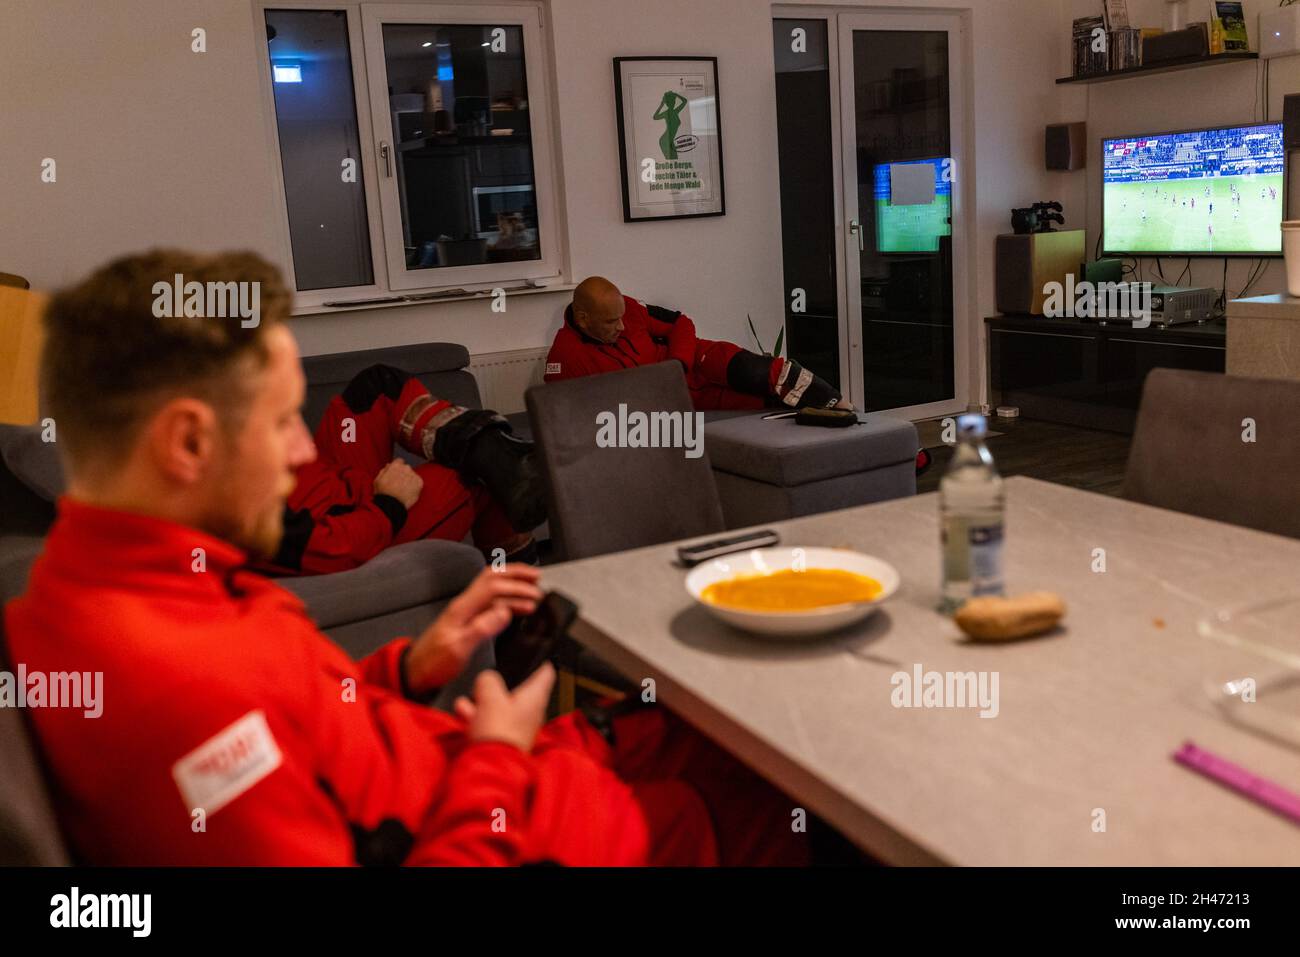 PRODUCTION - 11 October 2021, Baden-Wuerttemberg, Villingen-Schwenningen: The pilots of the rescue helicopter, Roy Fleischer (l-r) and Matthias Fleisch look at their smartphones while sitting in front of their dinner and lying on the sofa. The rescue helicopter Christoph 54 is the only one in Baden-Württemberg that also has night flight capacity. The night crew with the two pilots takes over the flying intensive care unit from 6.30pm in the evening until 7am the following morning. It is stationed at the Villingen-Schwenningen station of the German Air Rescue Service (DRF) and flies missions fr Stock Photo